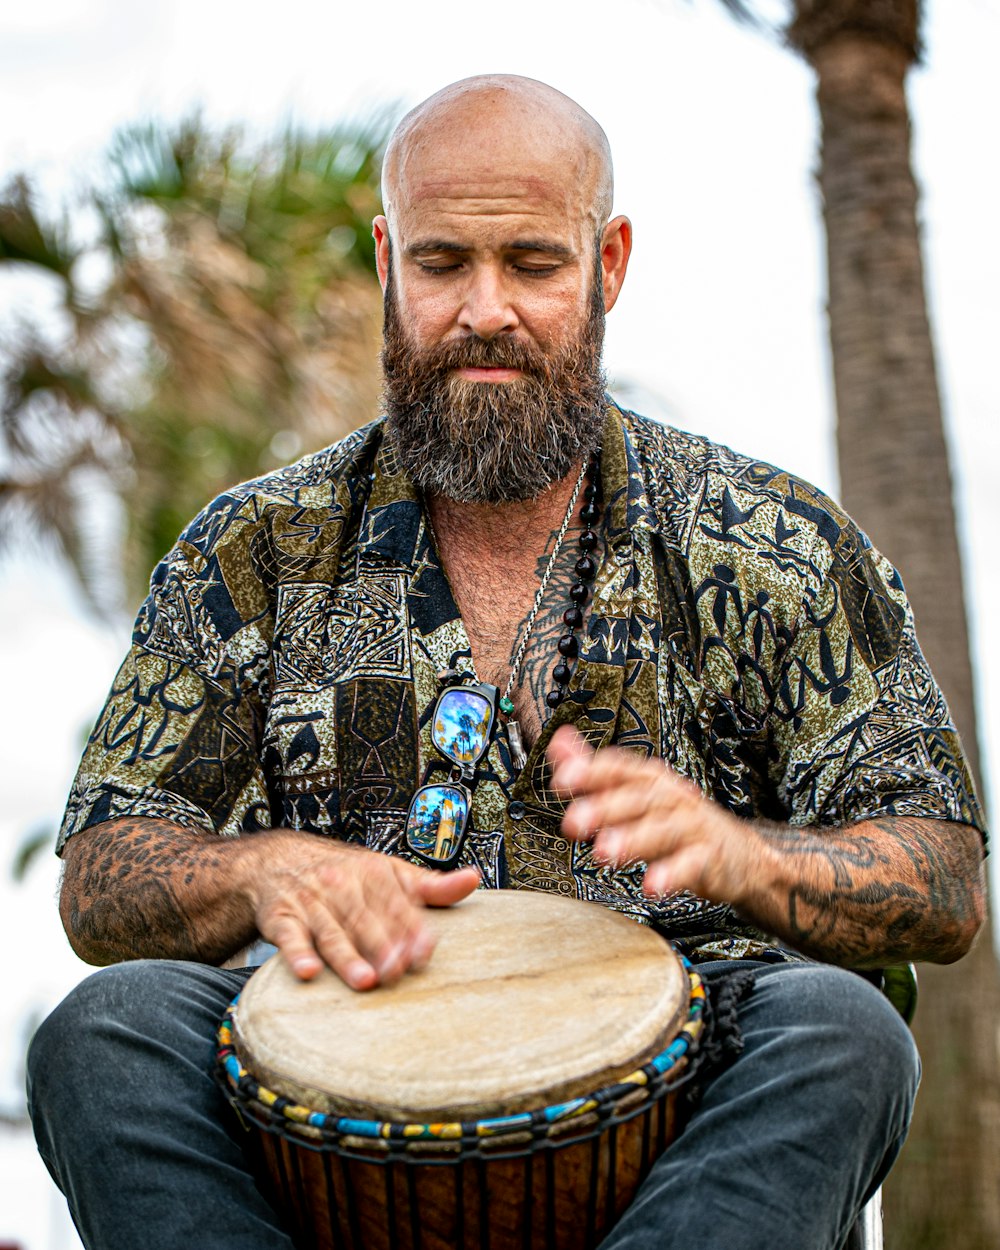 a man with a beard playing a drum